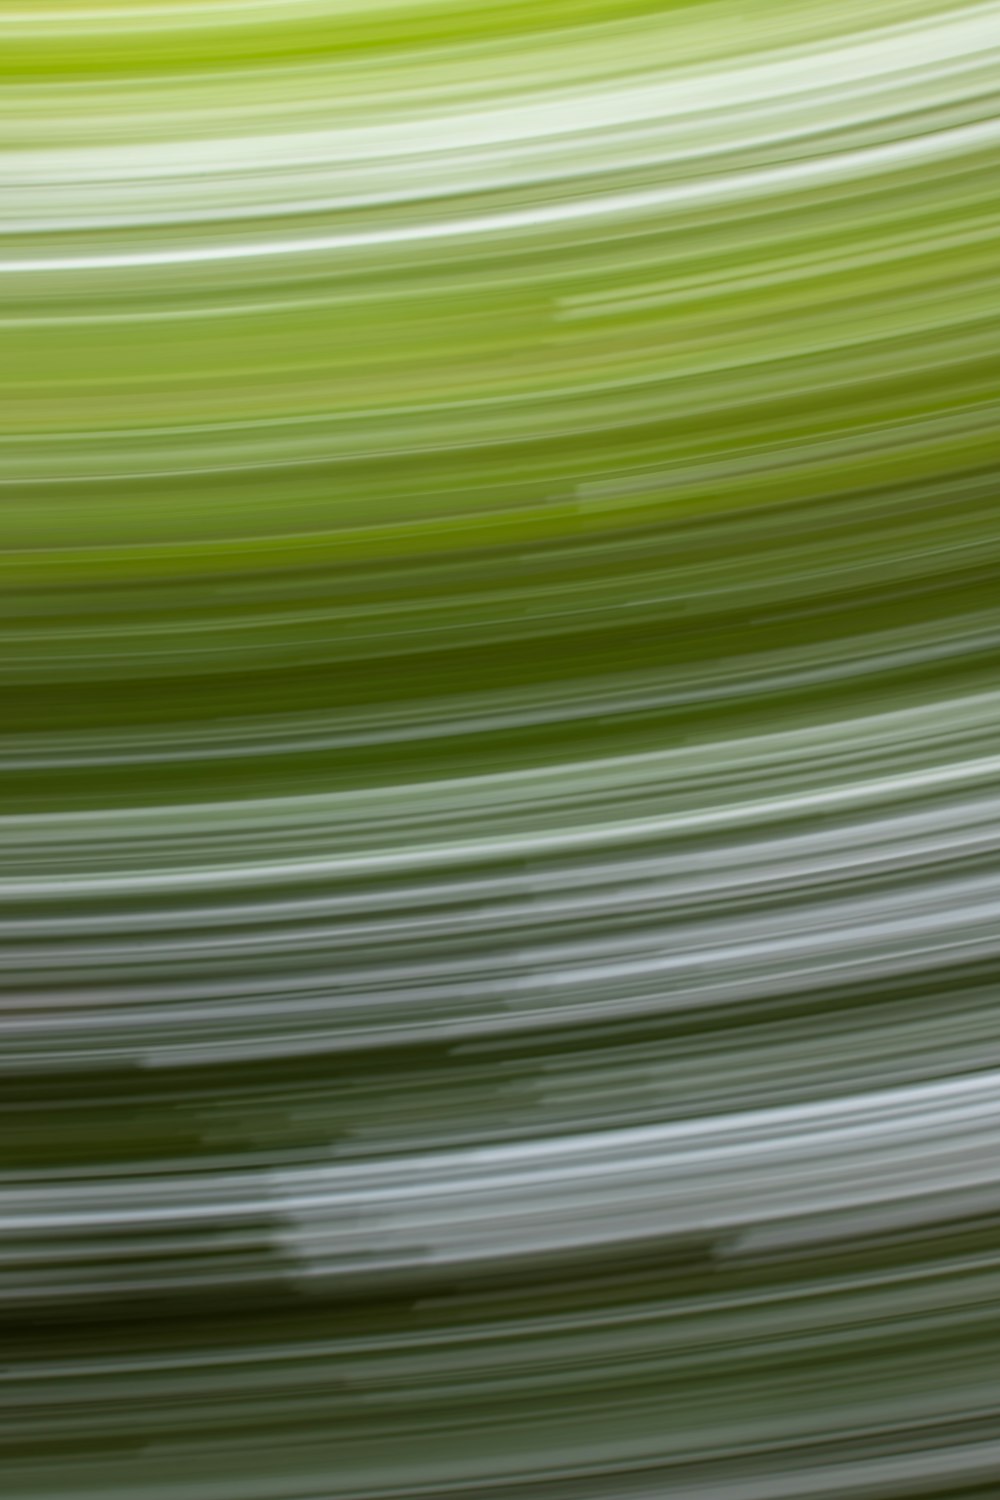 a blurry photo of a green and white object